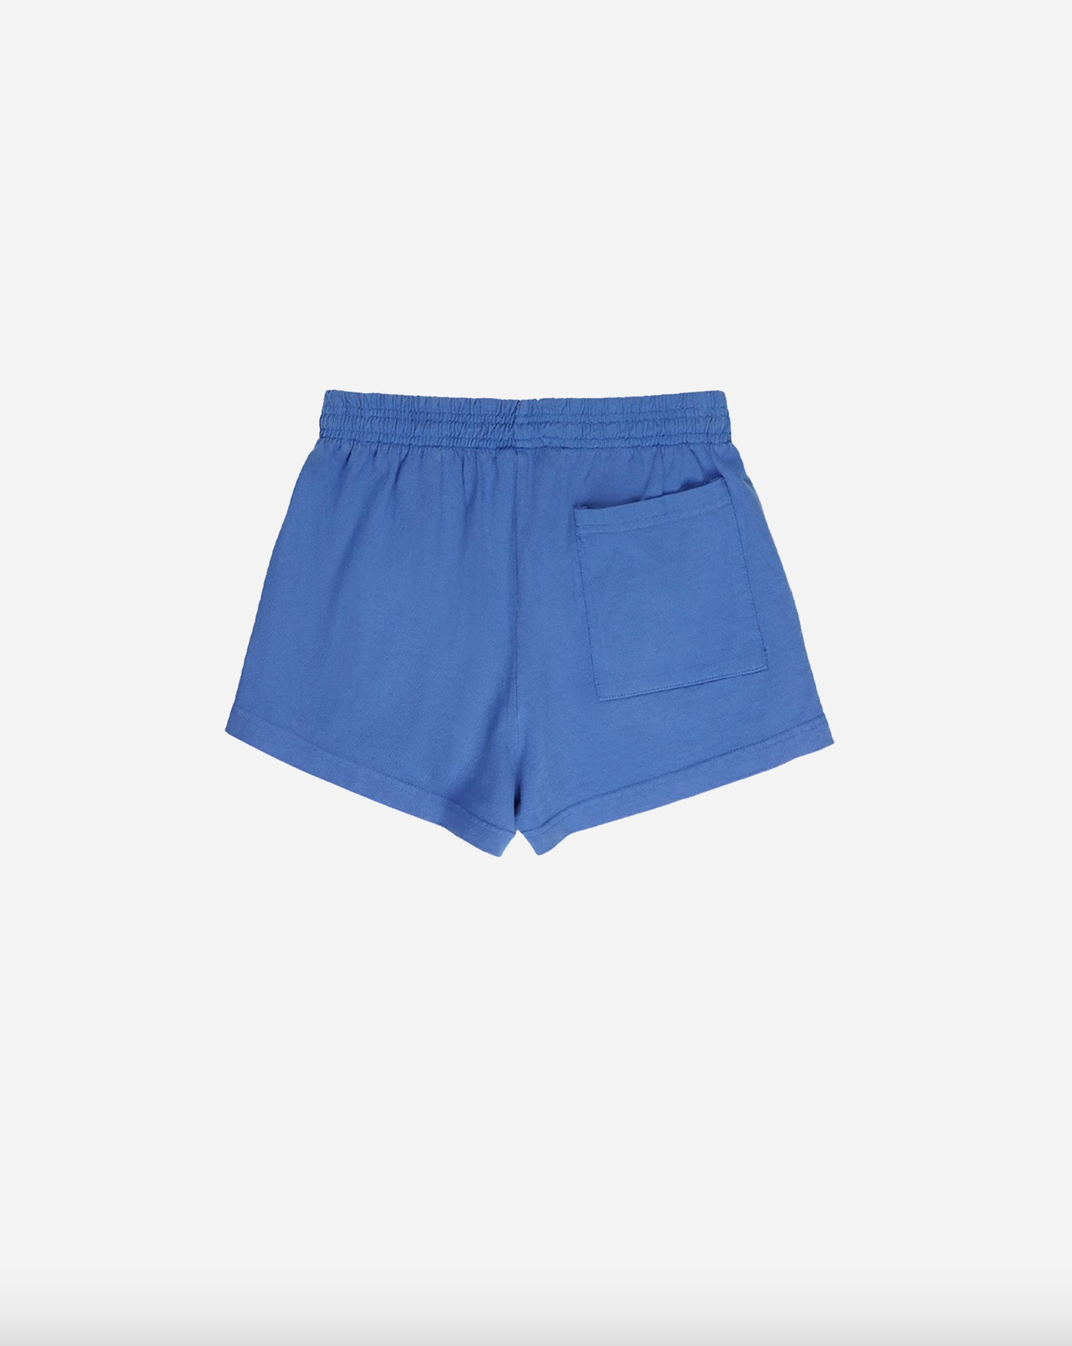 SPORTY AND RICH Rizzoli Disco Short